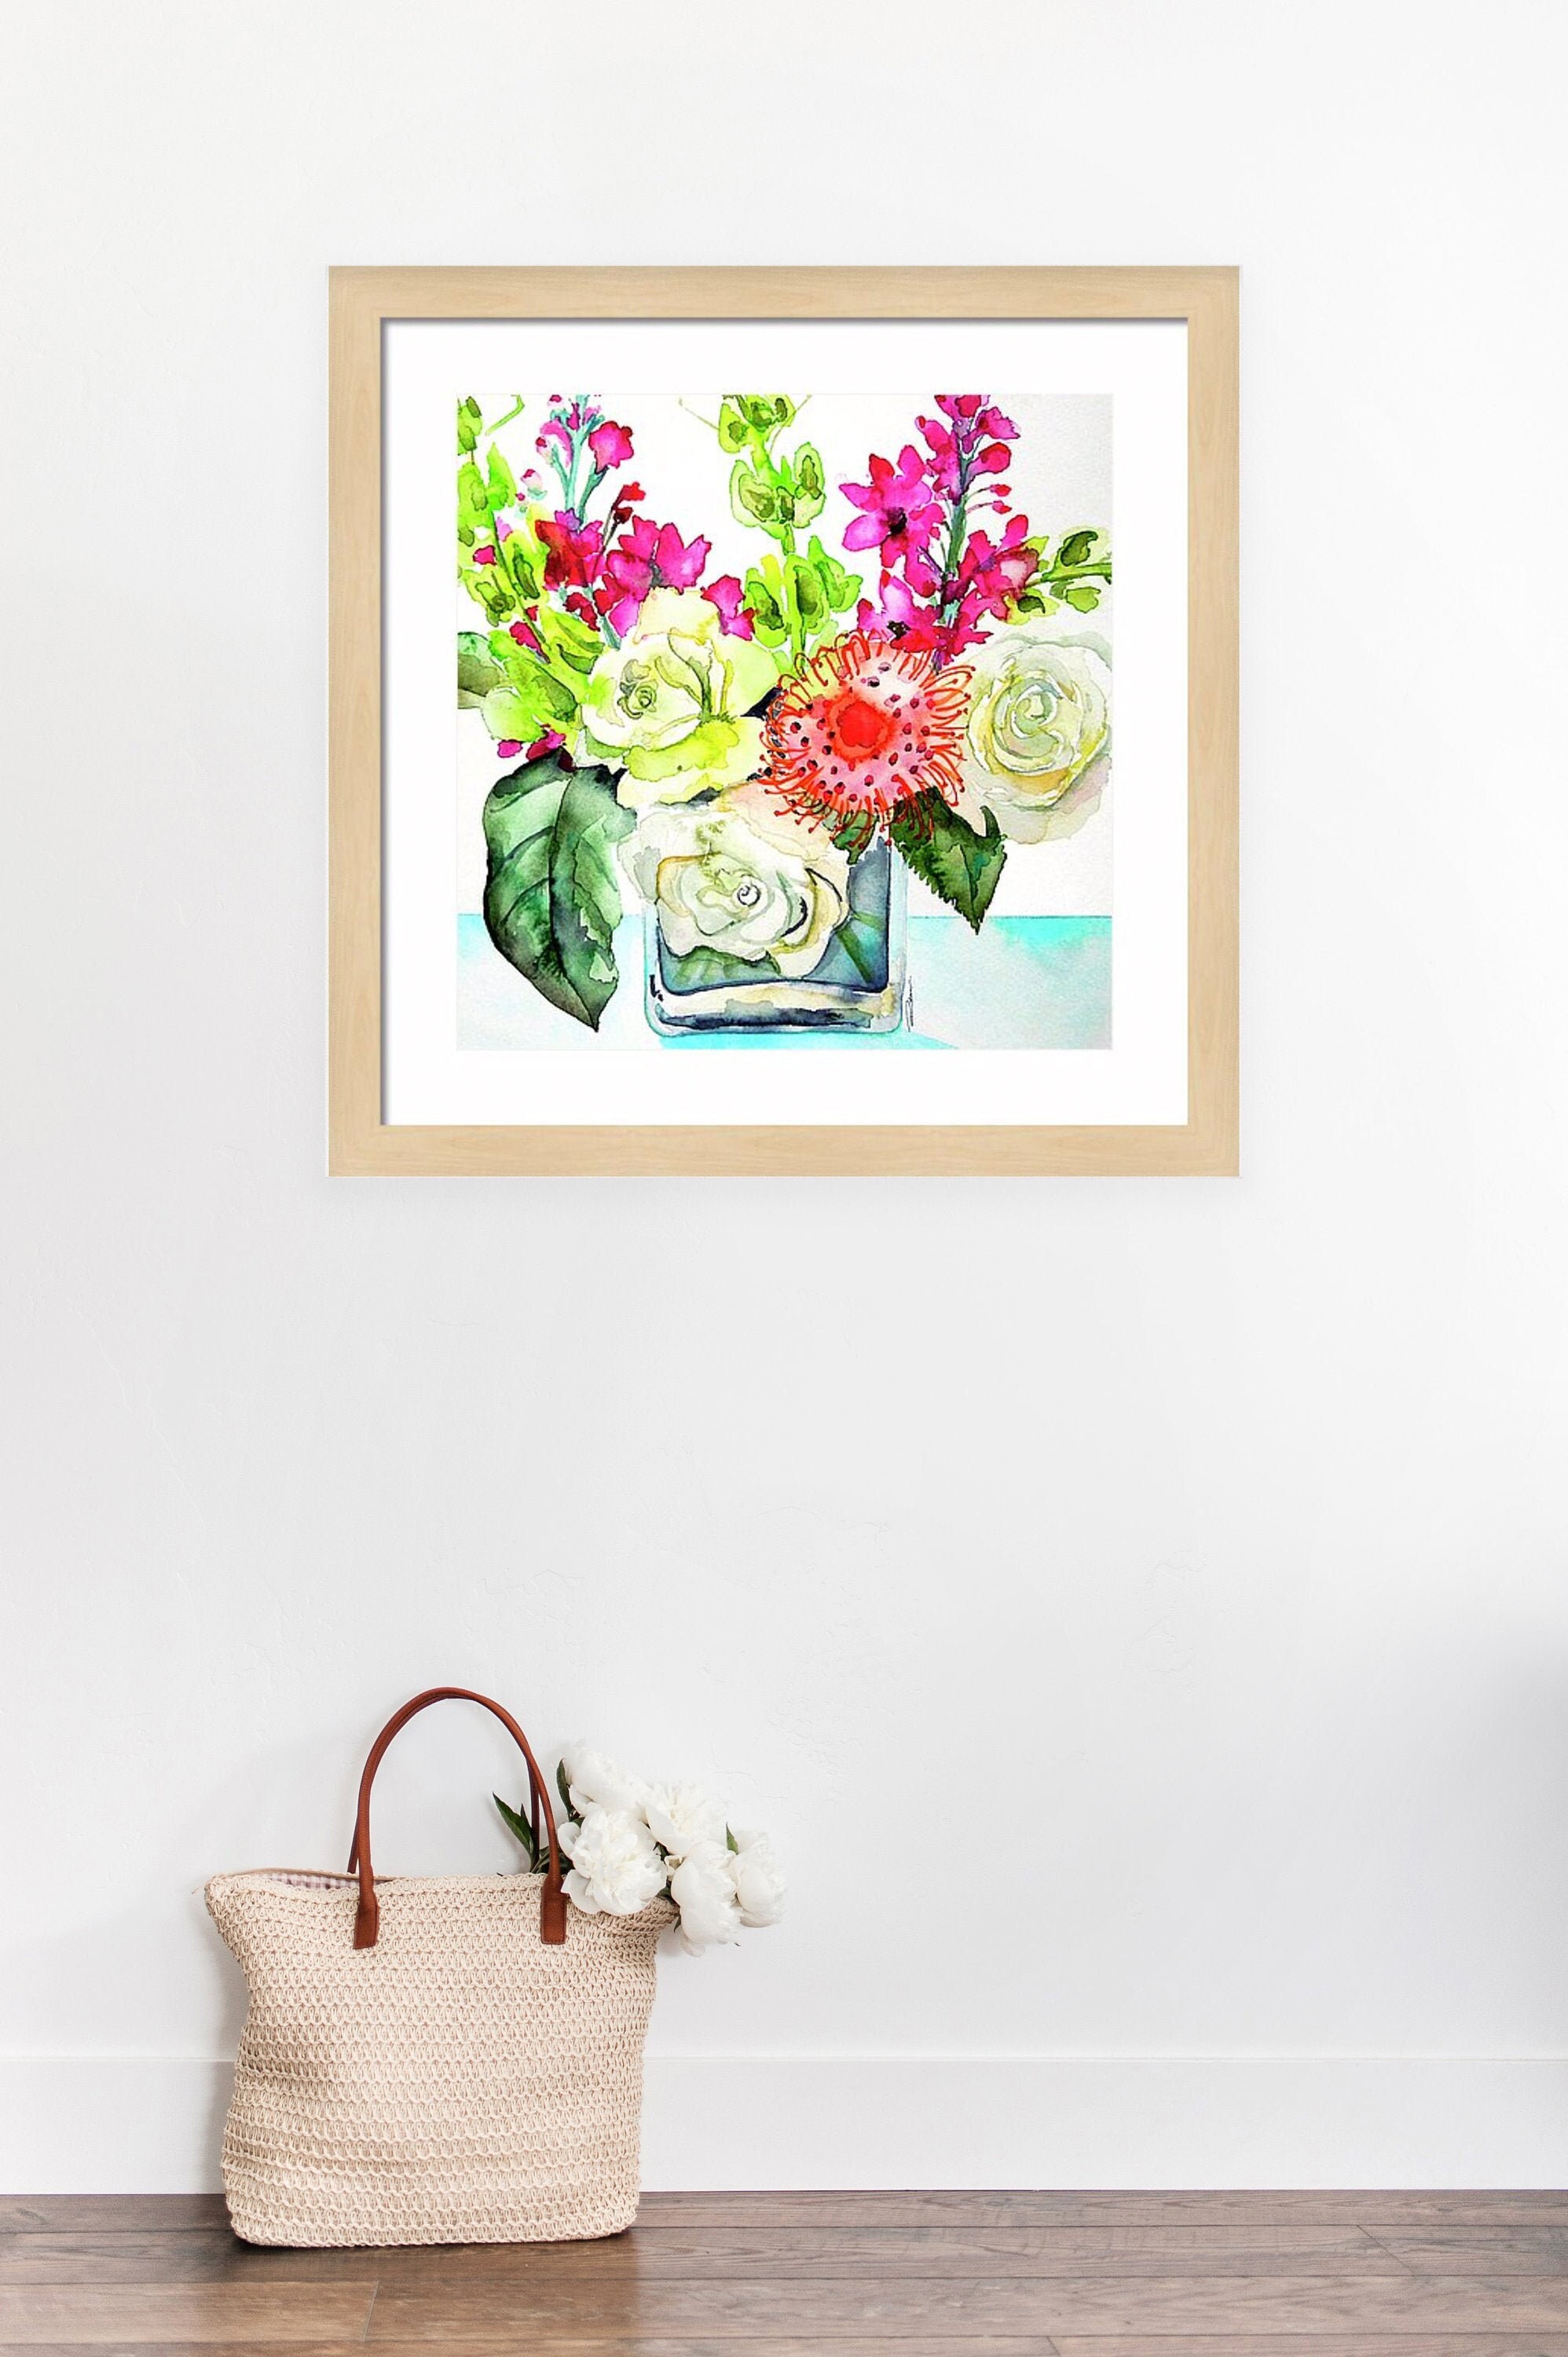 Floral Art Print of Watercolor | Etsy